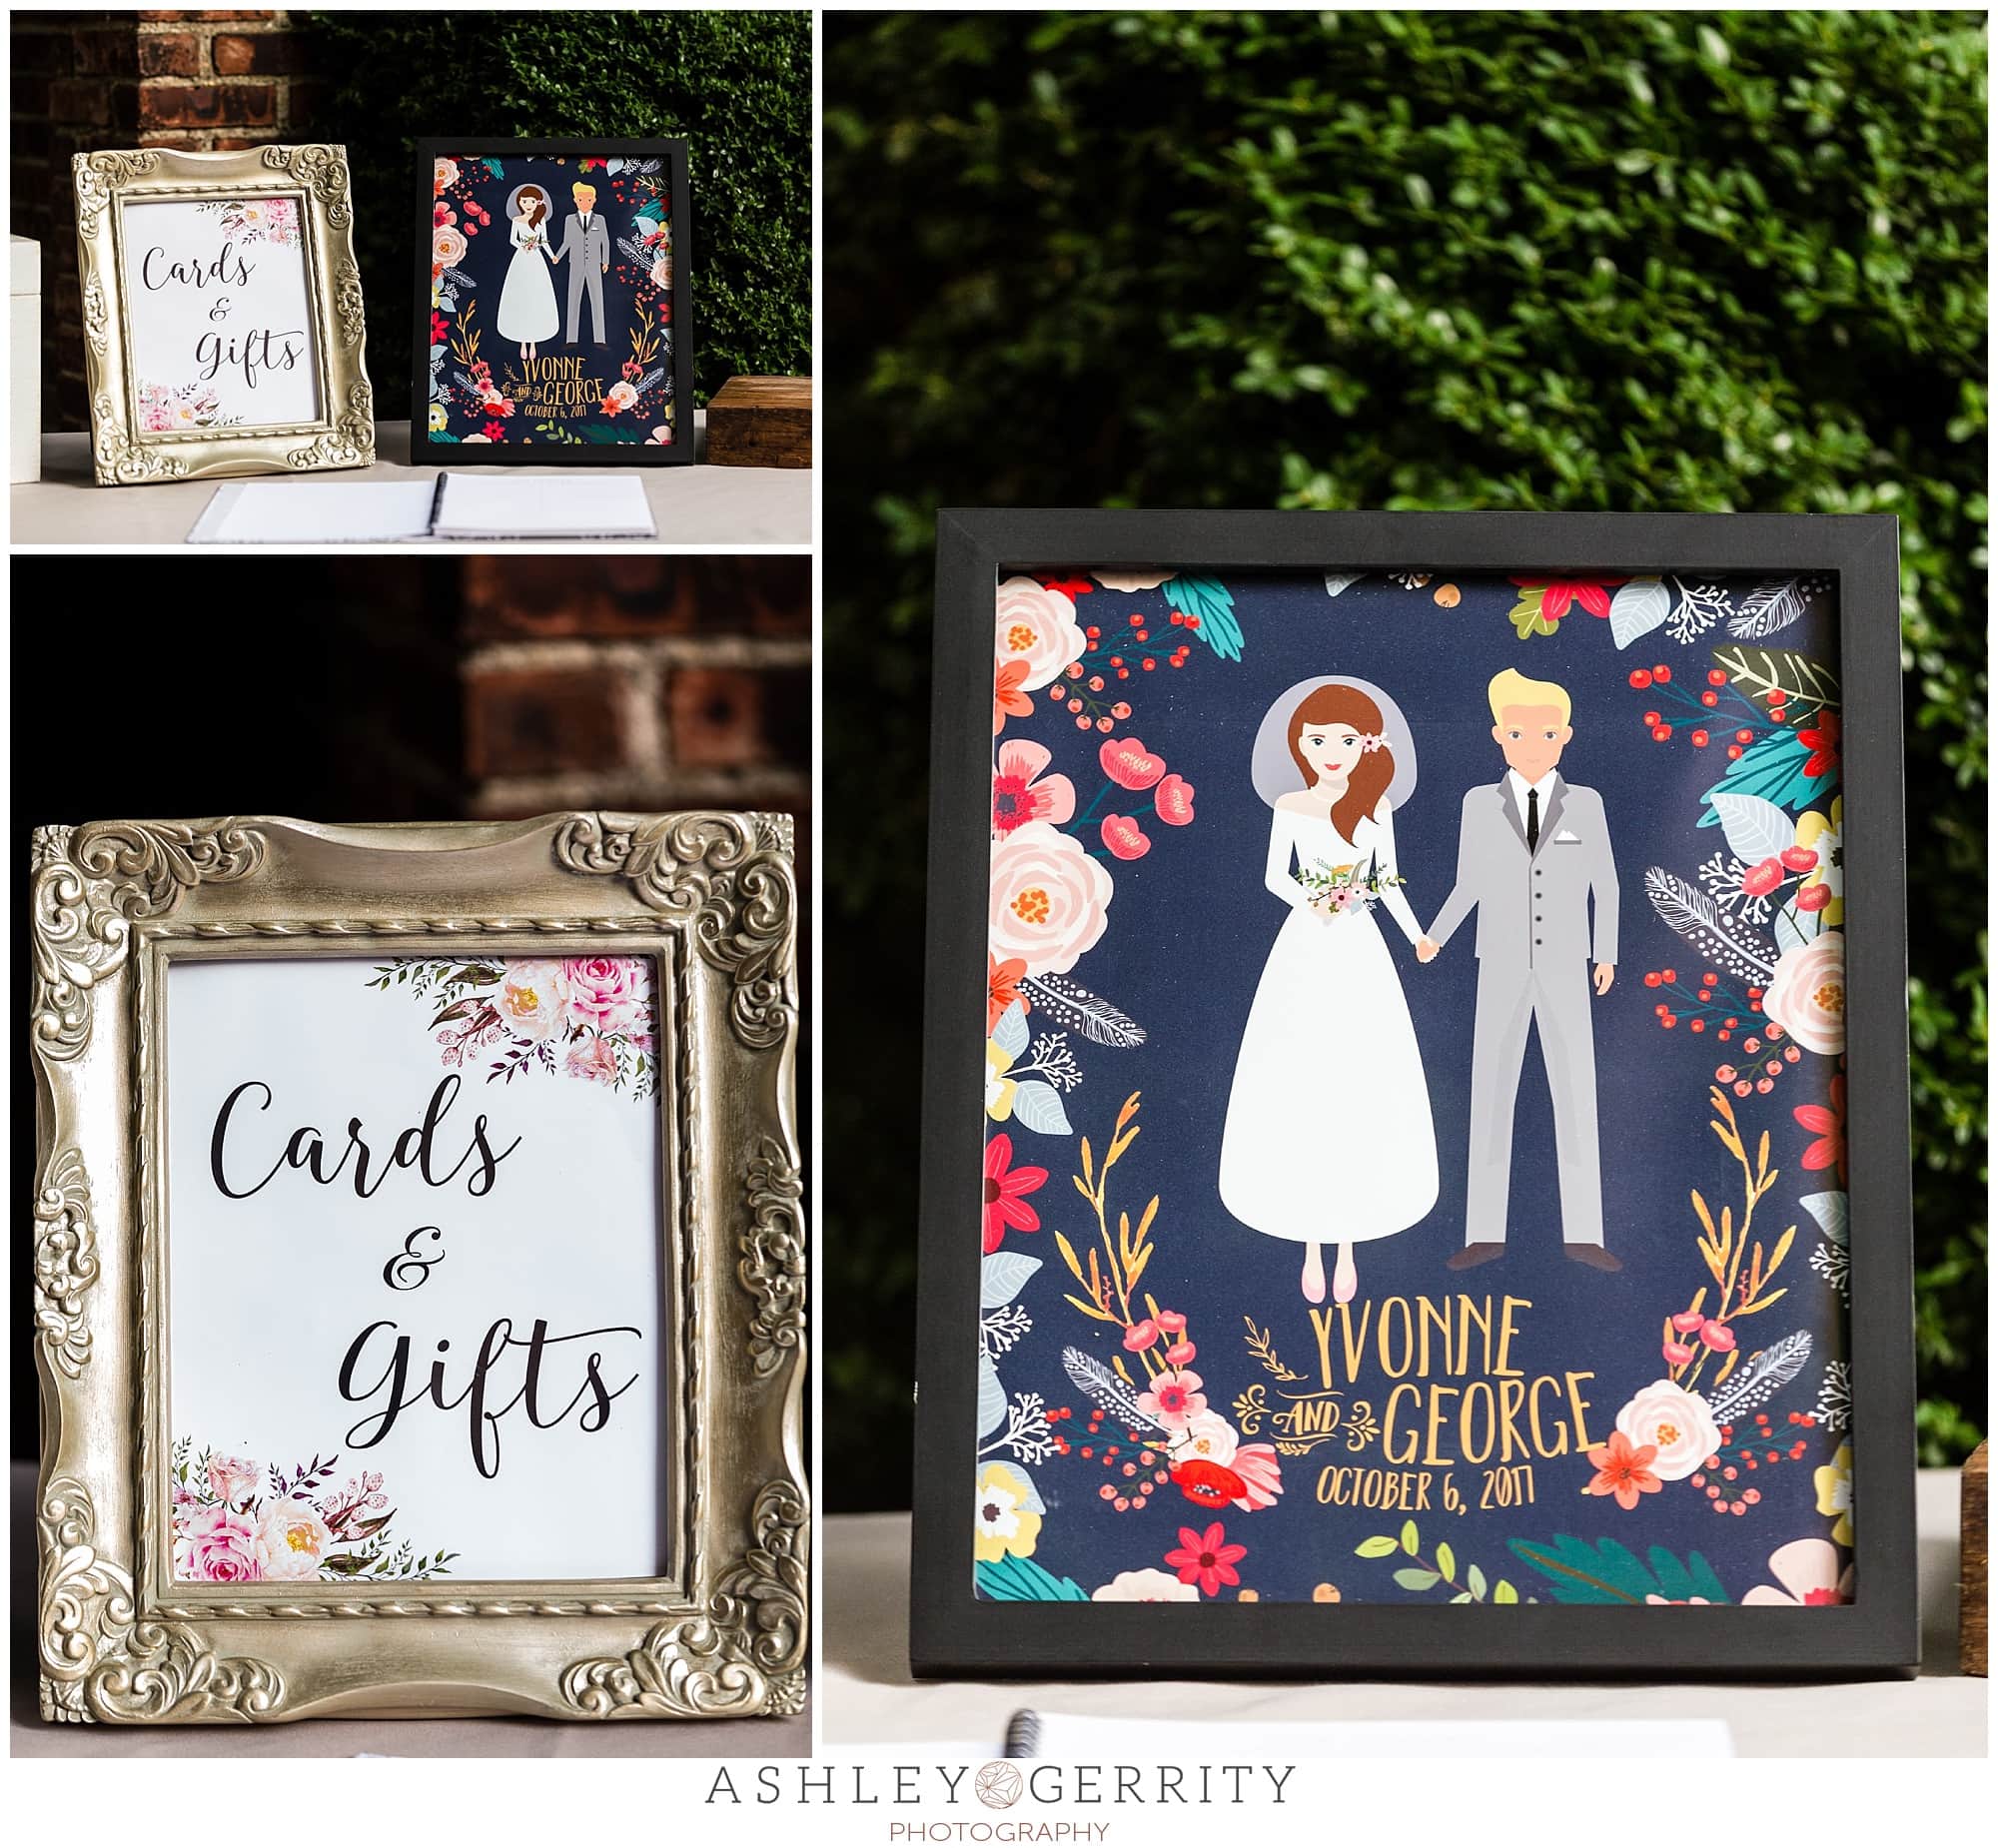 Hand-drawn wedding signs at the Colonial Dames in Philadelphia featuring caricatures of the bride & groom with vibrant floral colors